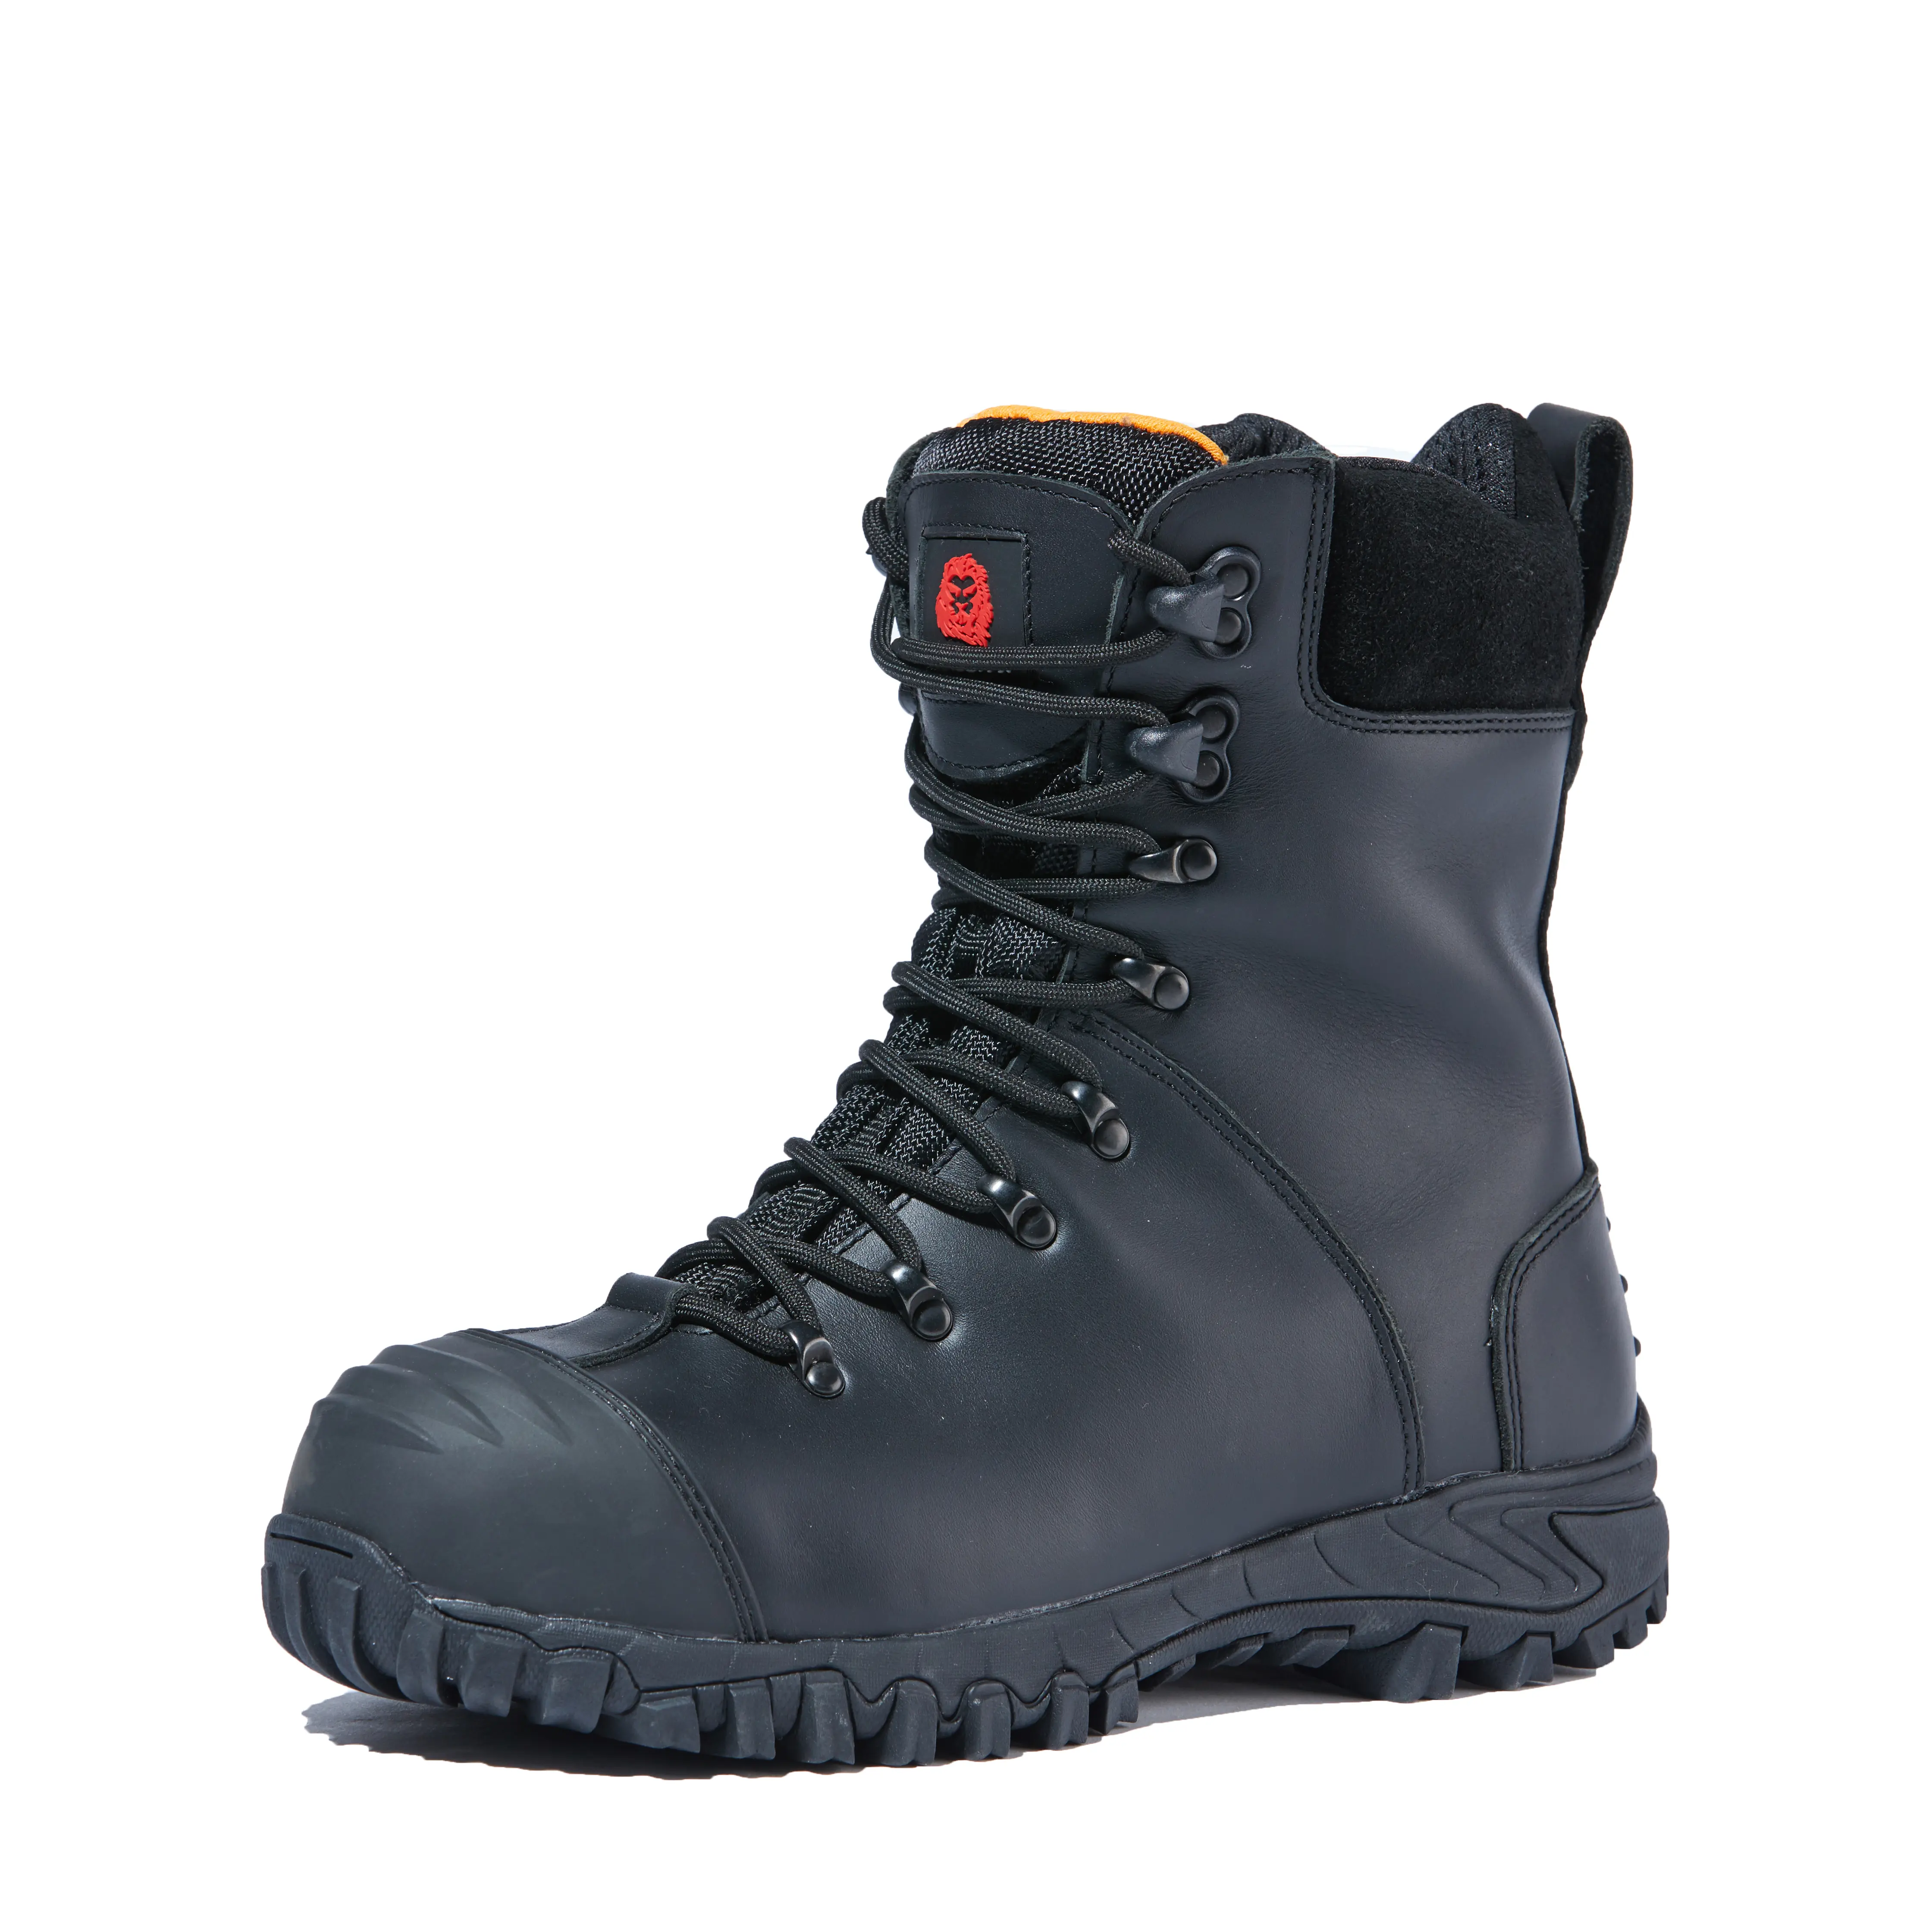 black safety shoes Cold insulation thinsulate lining work footwear safety boots winter waterproof safety shoe for men buy toefl